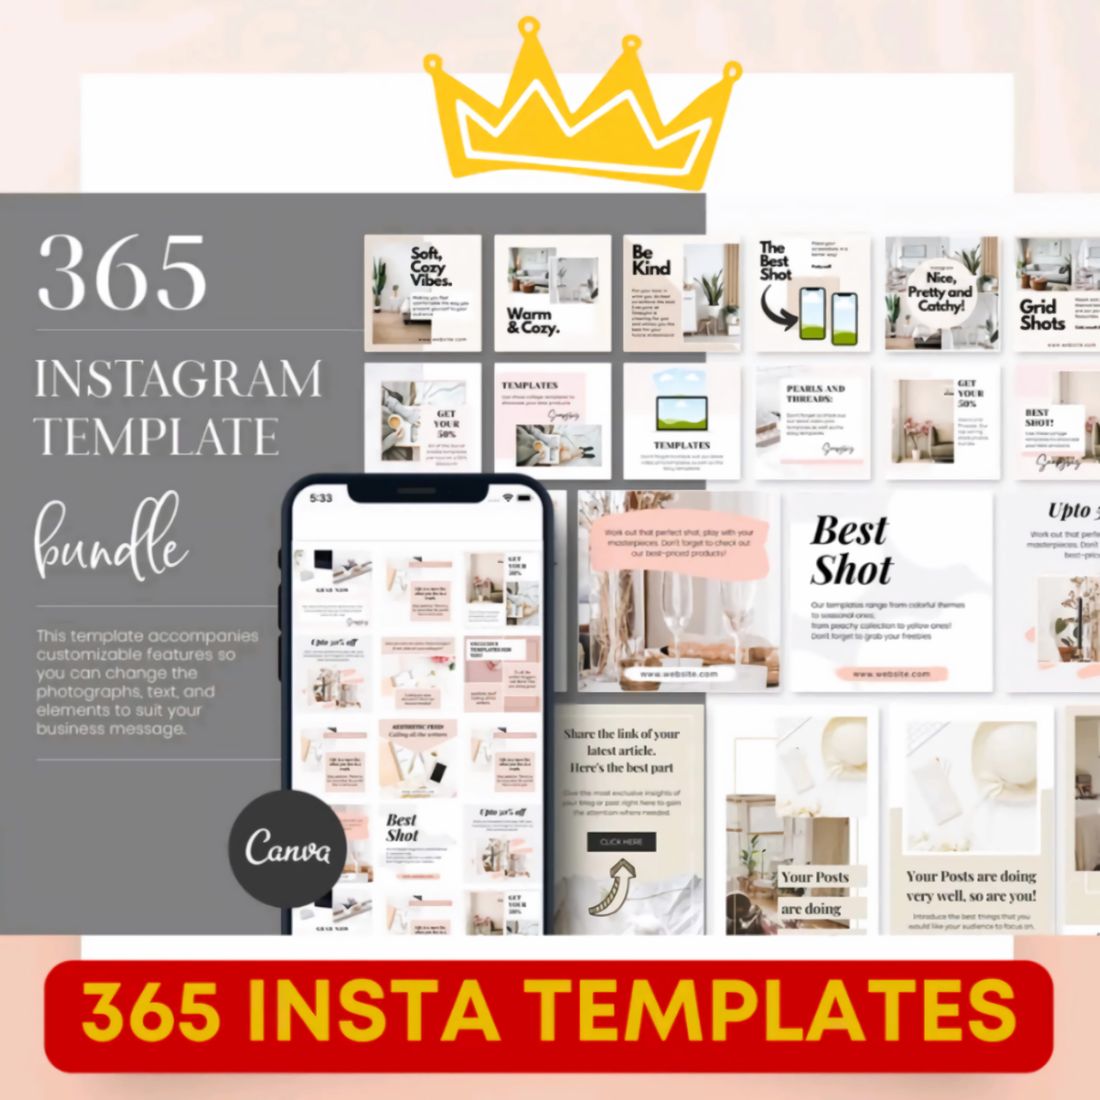 Instagram Canva Templates - Social Media IG Feed Post Templates cover image.